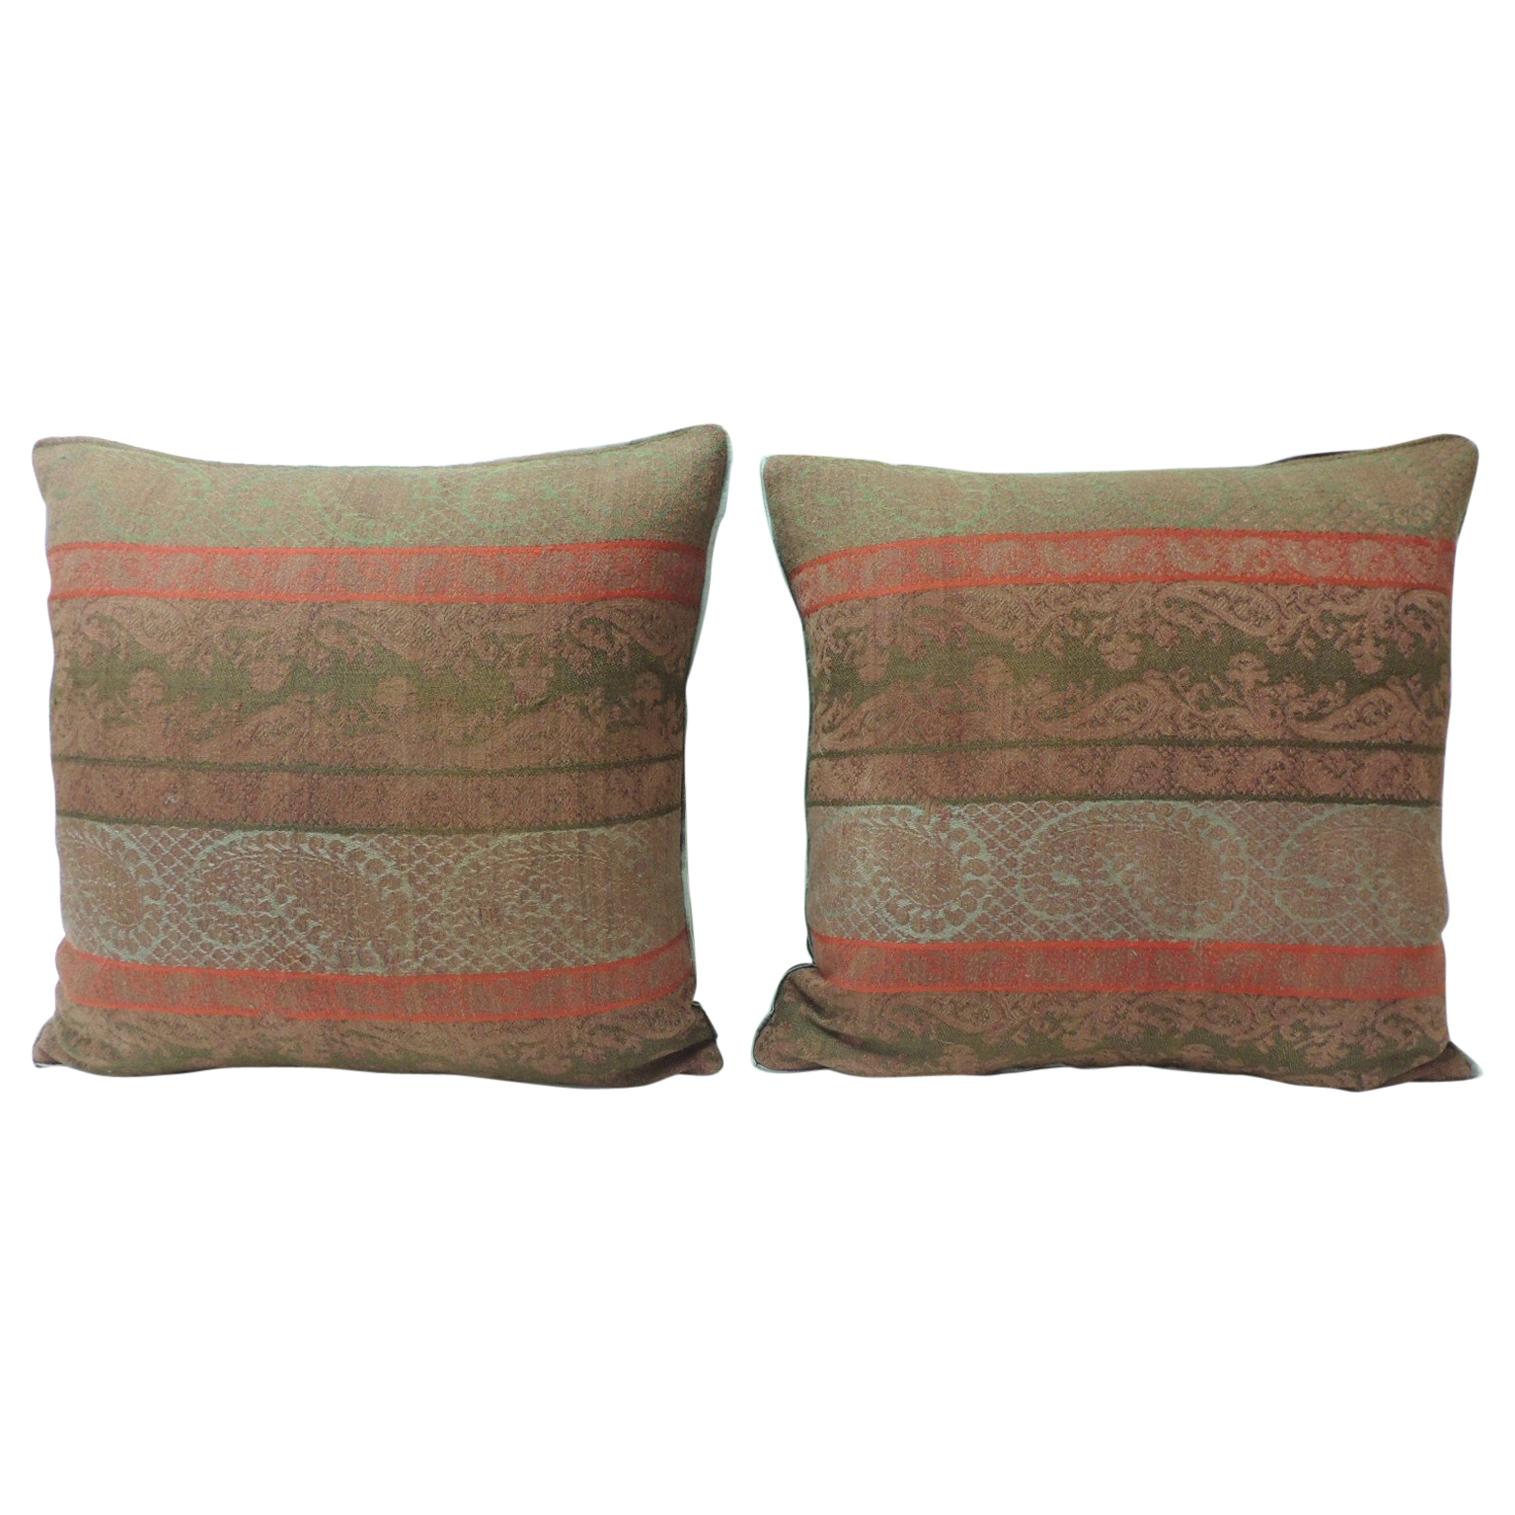 Pair of 19th Century Antique Woven Red Kashmir Paisley Square Decorative Pillows